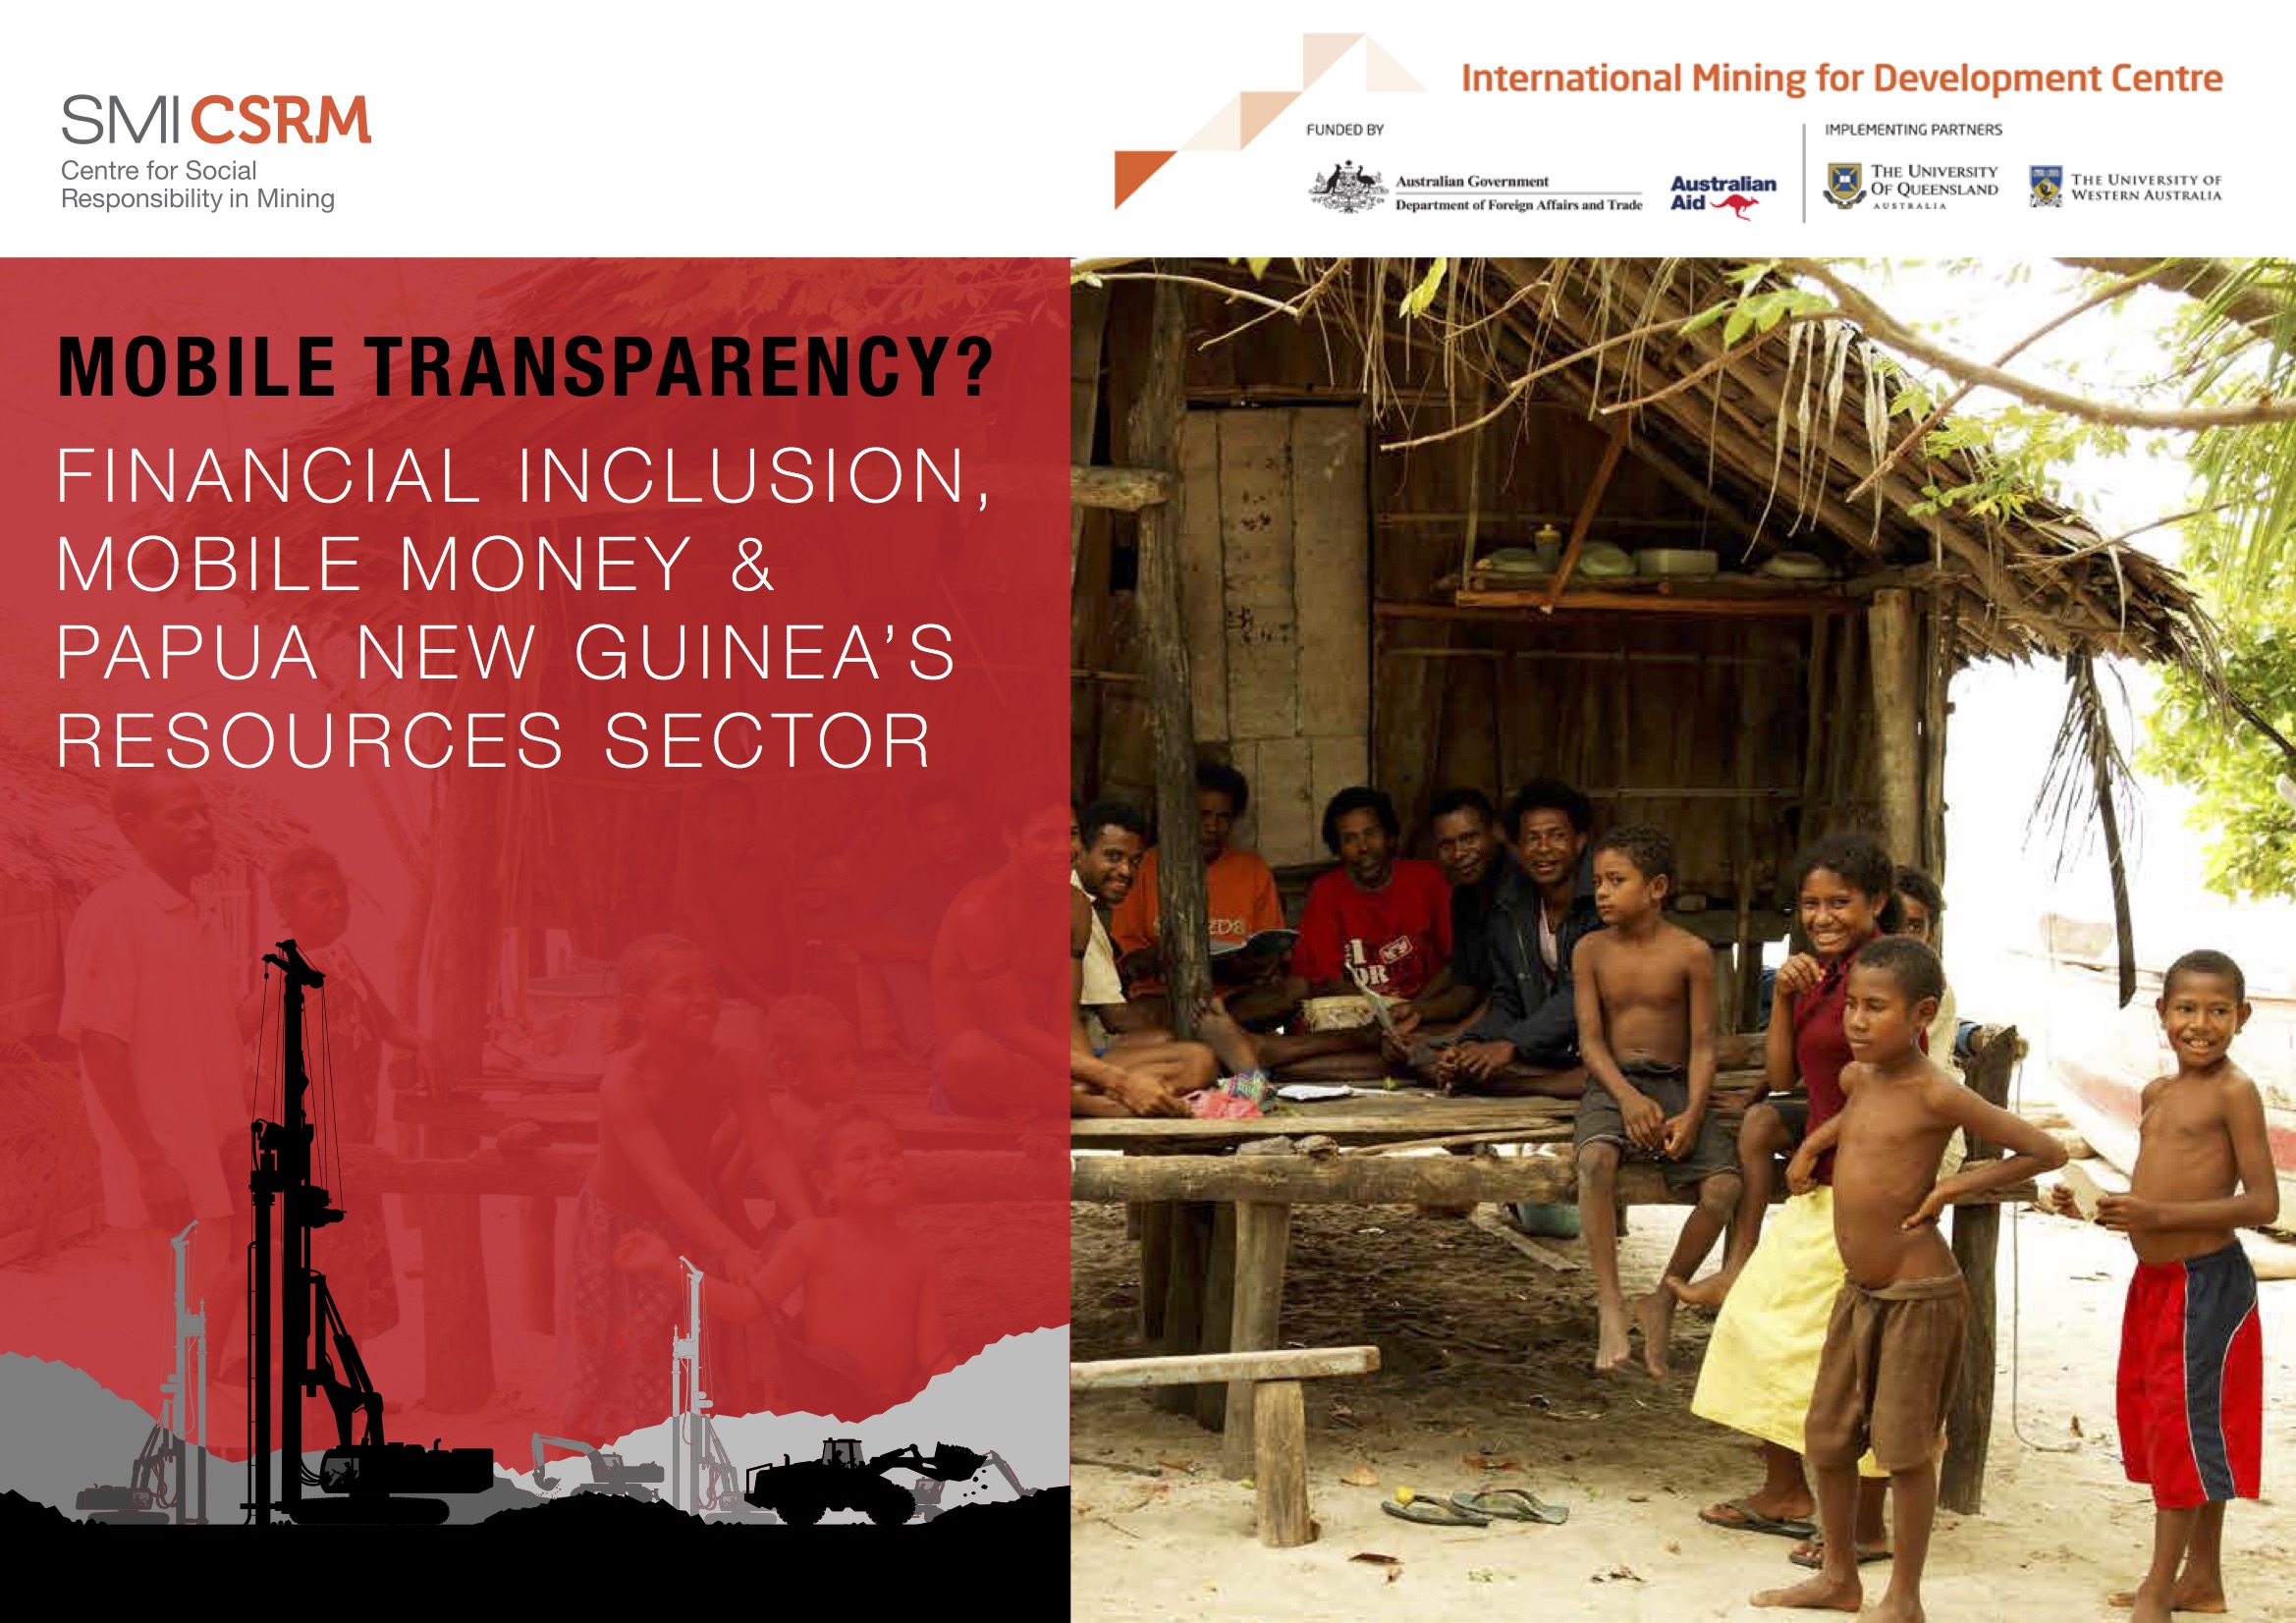 Mobile transparency? financial inclusion, mobile money and Papua New Guinea's resources sector